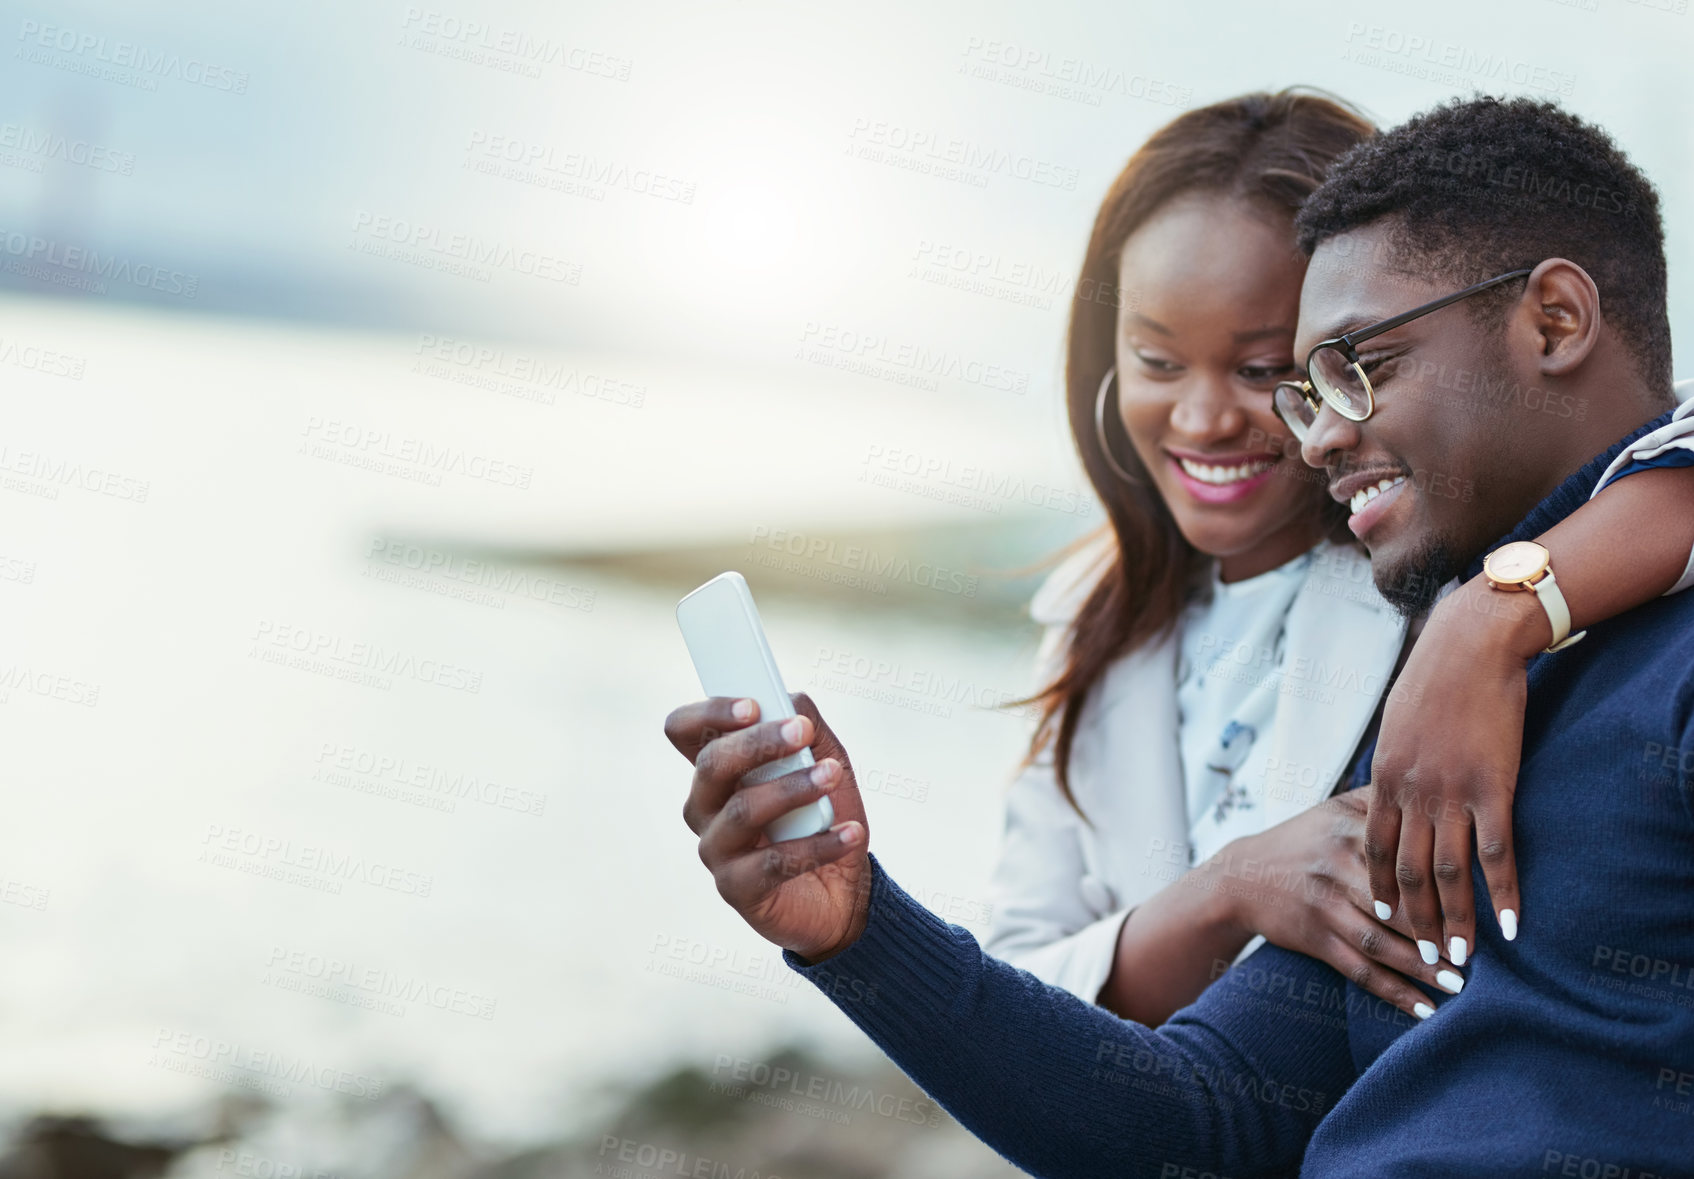 Buy stock photo Shot of an affectionate young couple using a cellphone together outdoors